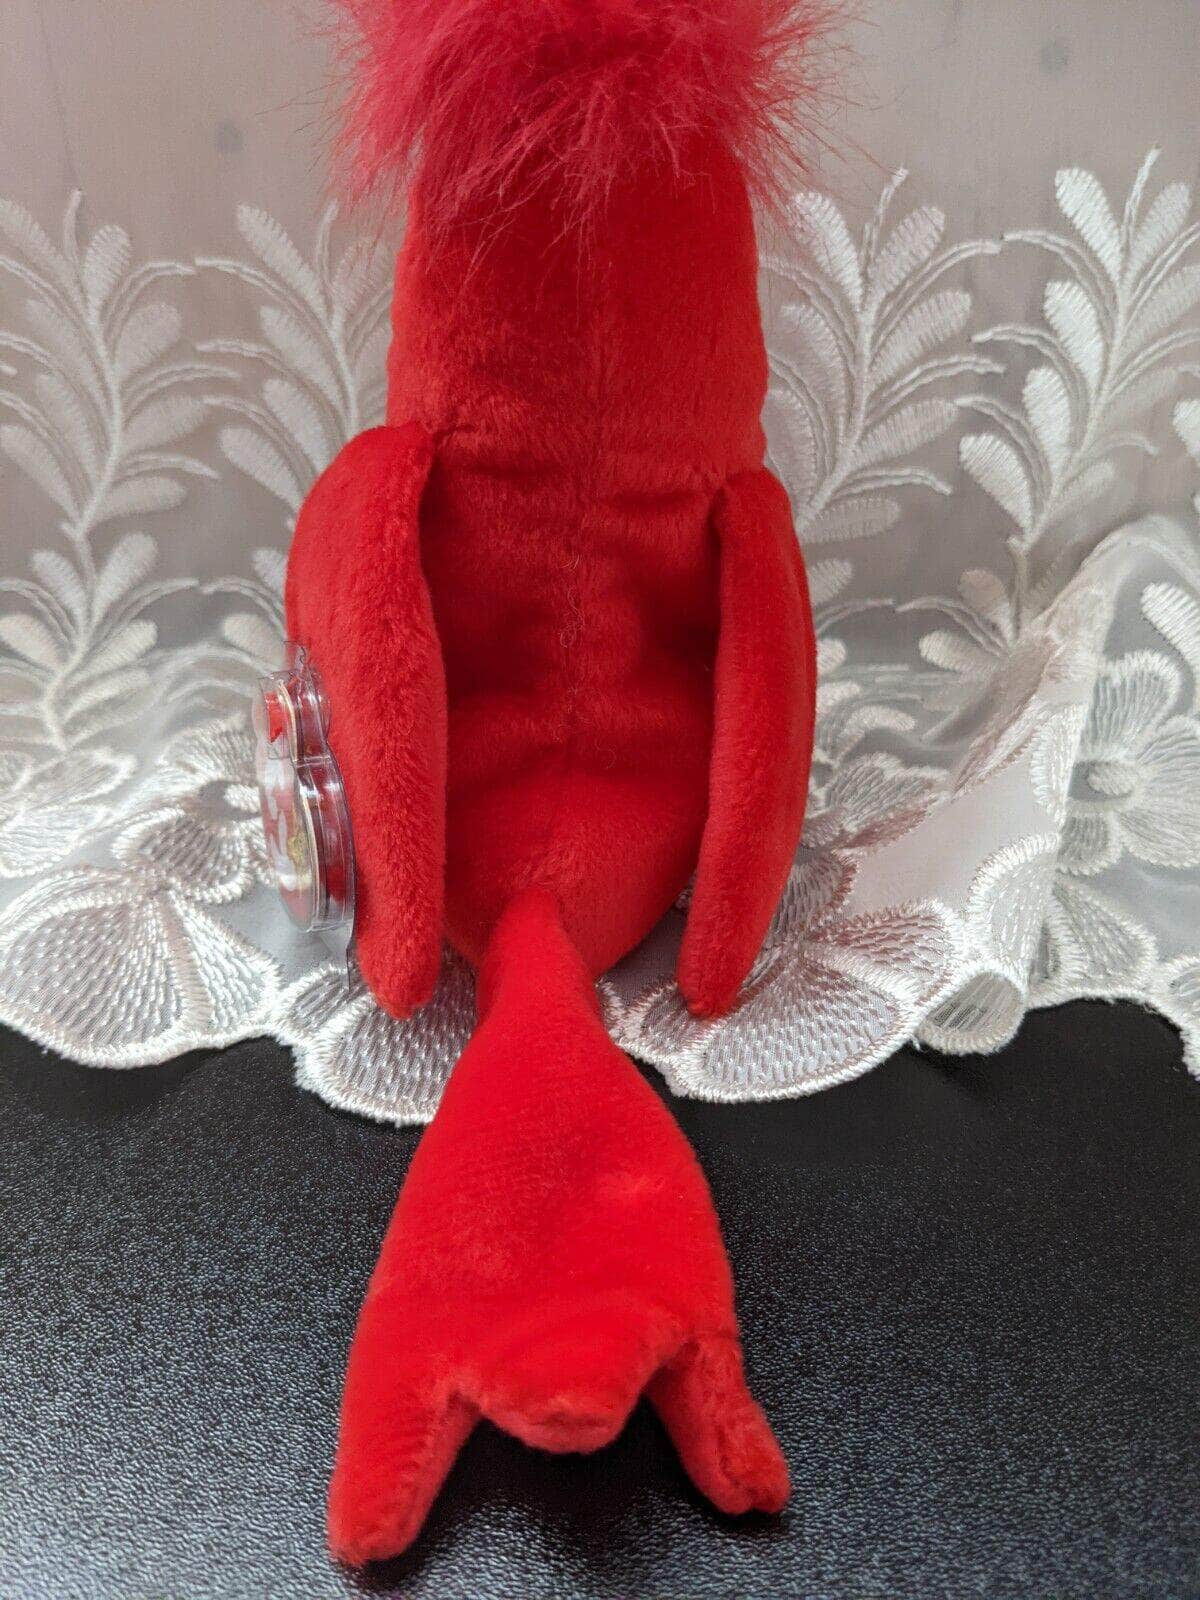 Ty Beanie Baby - Mac The Cardinal Plush Toy (5in) - Vintage Beanies Canada